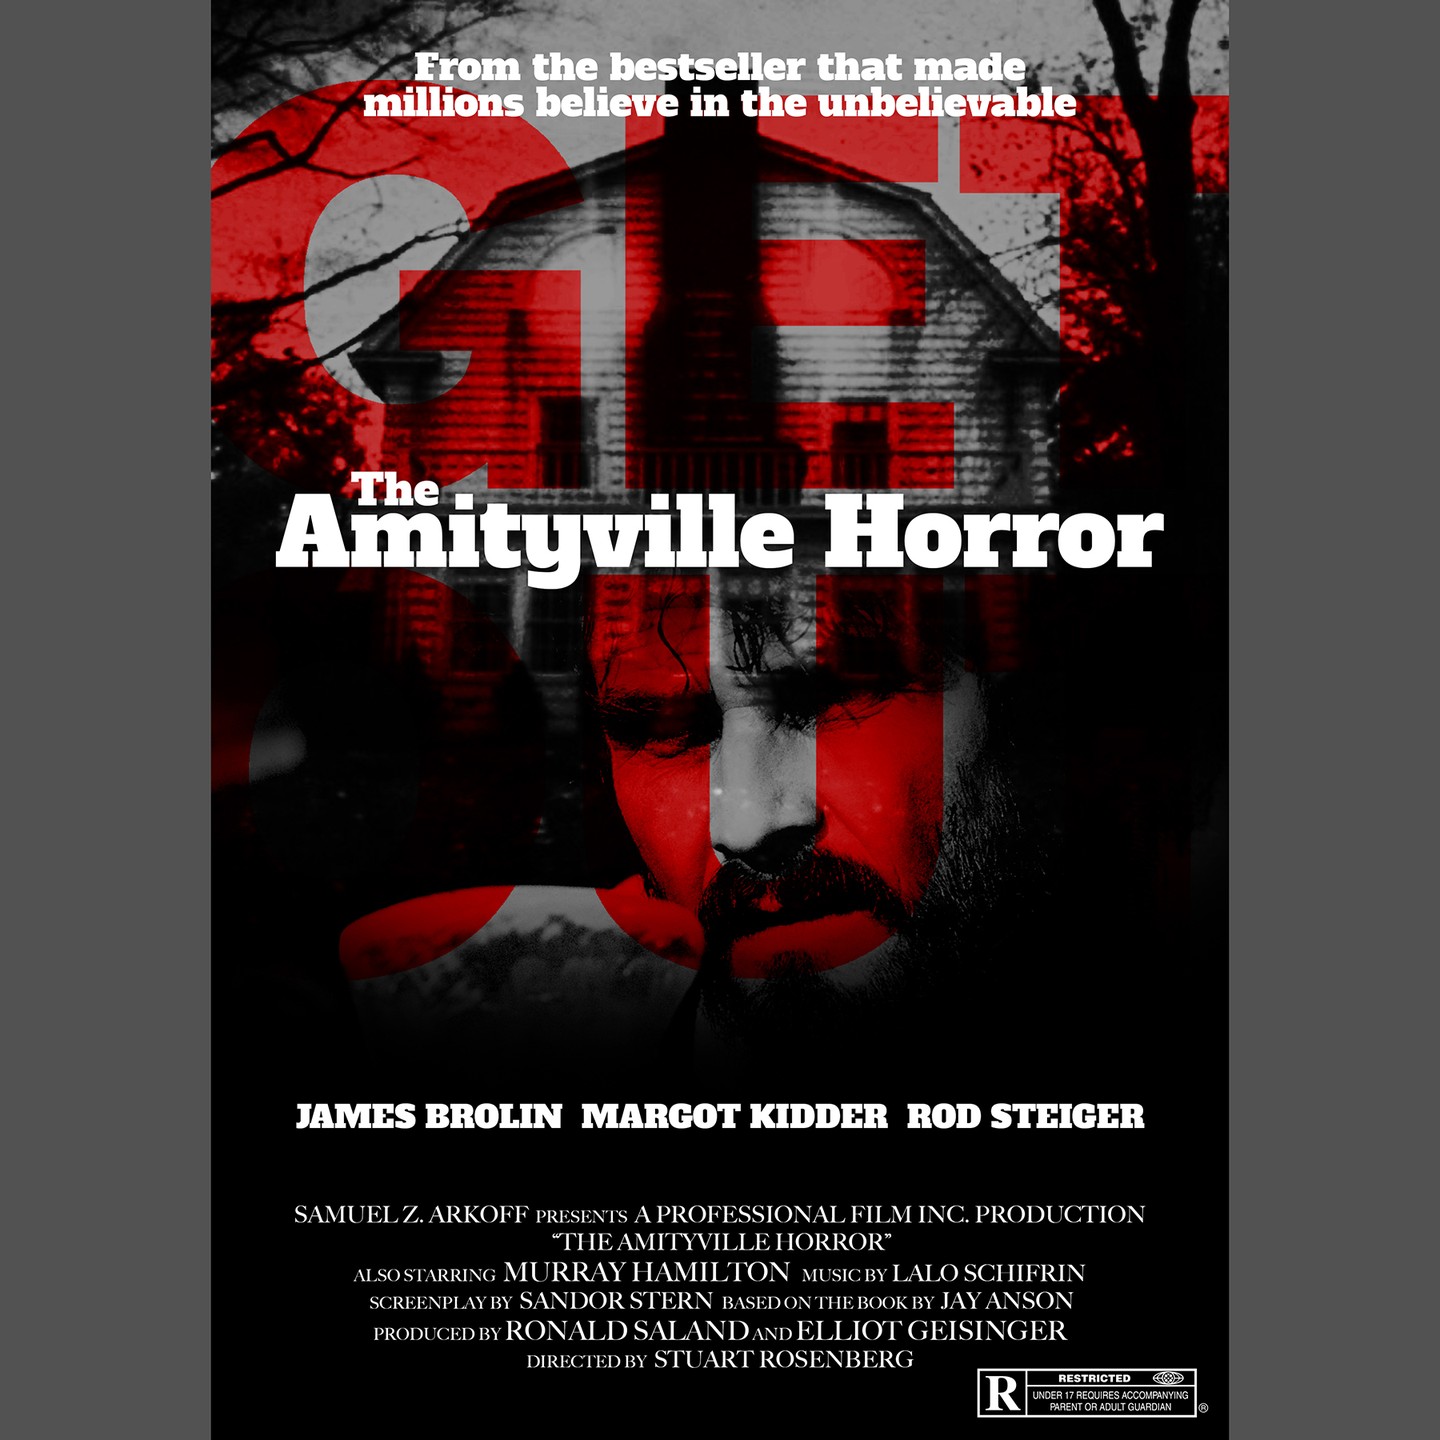 #releasedonthisday in 1979, the classic The Amityville Horror hit cinemas. Telling the story of the Lutz family and their time in the infamous house. A personal favourite ☠

This is the #15minutemovieposter I created last year.

#posterart #horrorart #horrormovie #posters #designchallenege #posterdesign #alternativemovieposter
#horrorﬁlm #horrormovies #horrordaily #horrorfans #horrorfamily #horrorcollector #horrorobsessed #horrornerd #instahorror #horrorcommunity #horrorfanatic #horrorcrazy #horrorgram #80shorror #theamityvillehorror #hauntedhouse